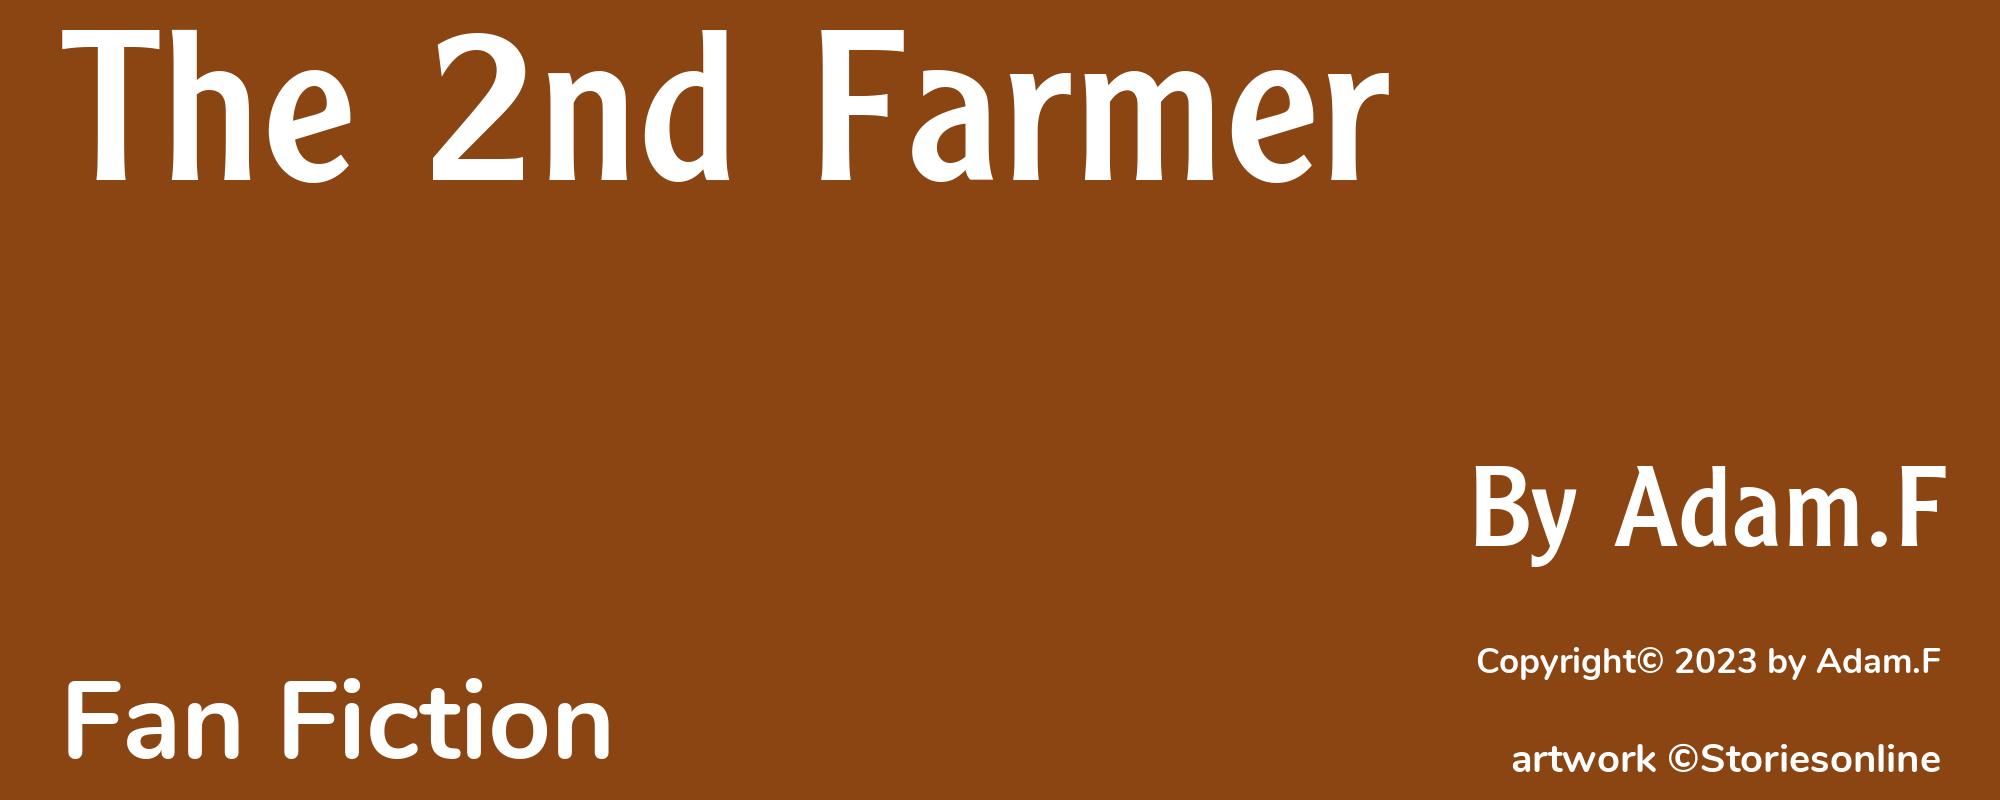 The 2nd Farmer - Cover